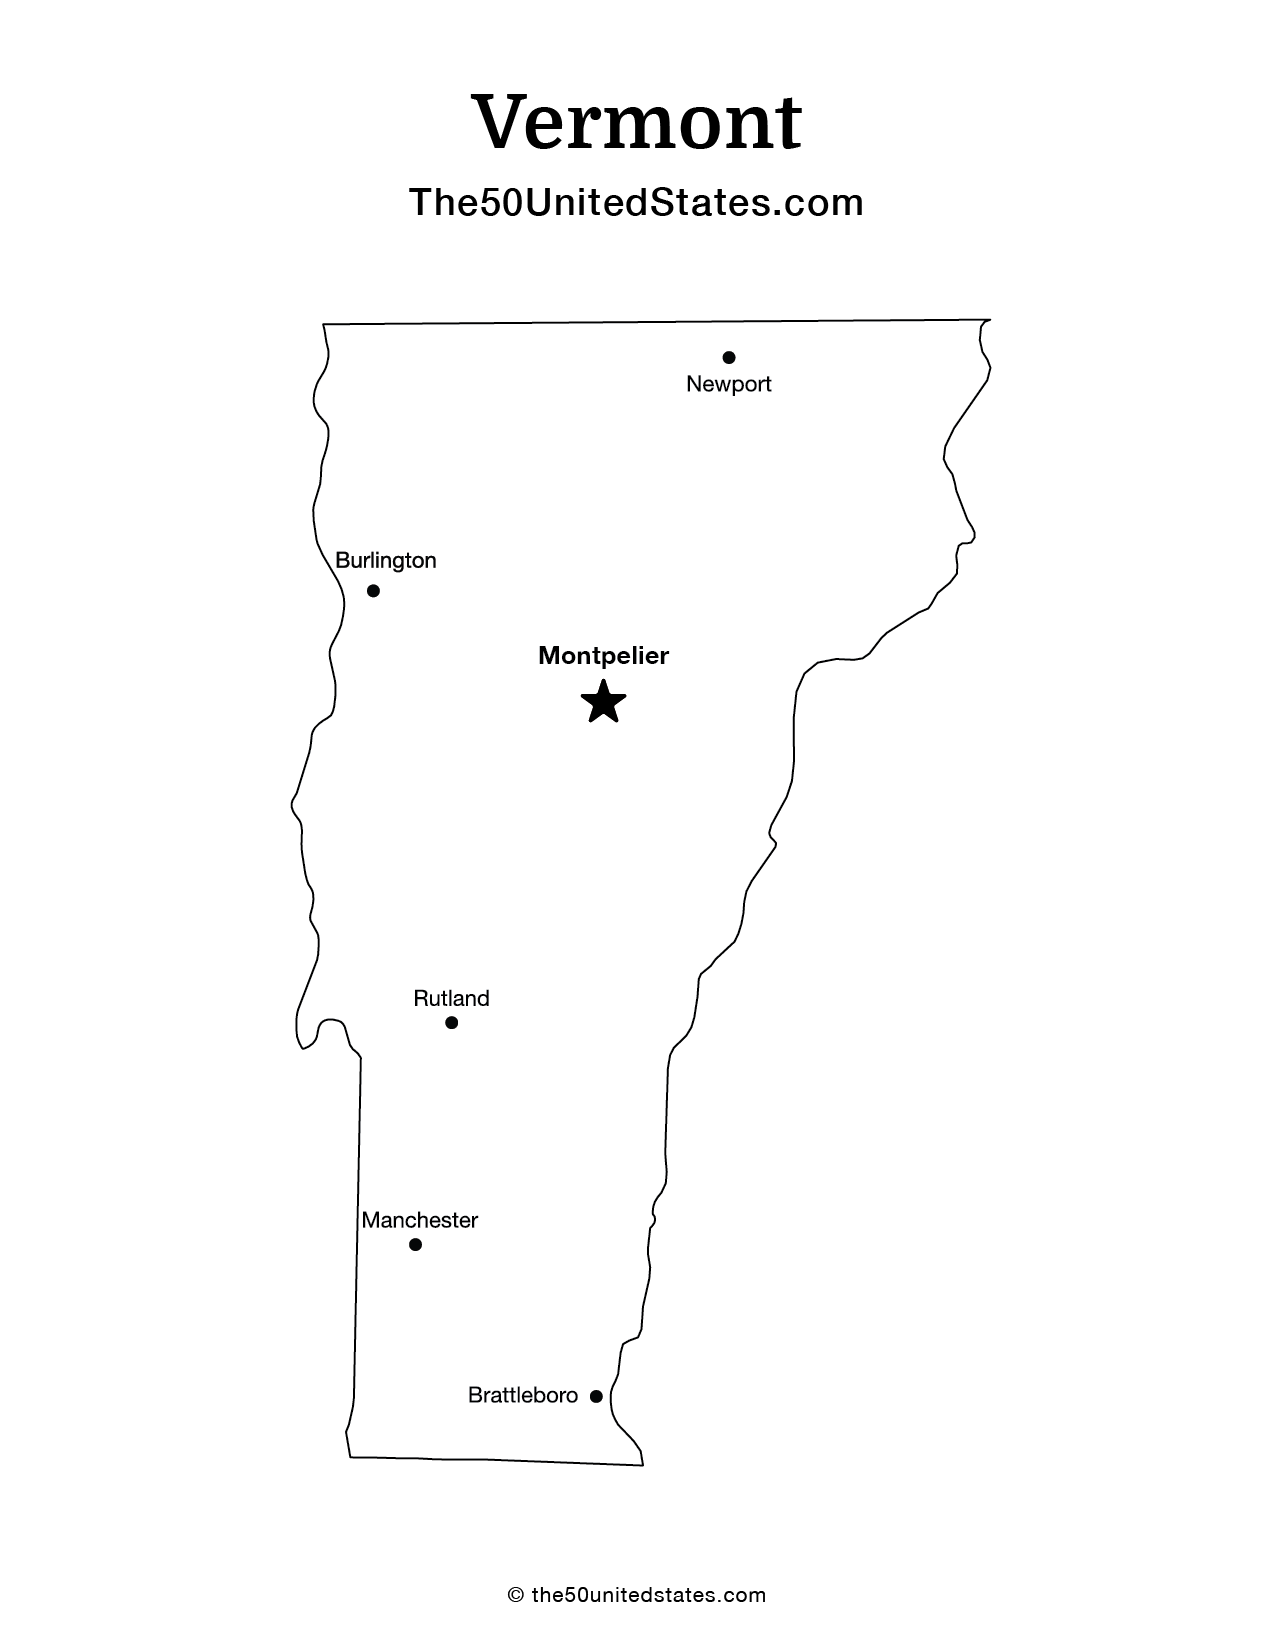 Map of Vermont with Cities (Labeled)